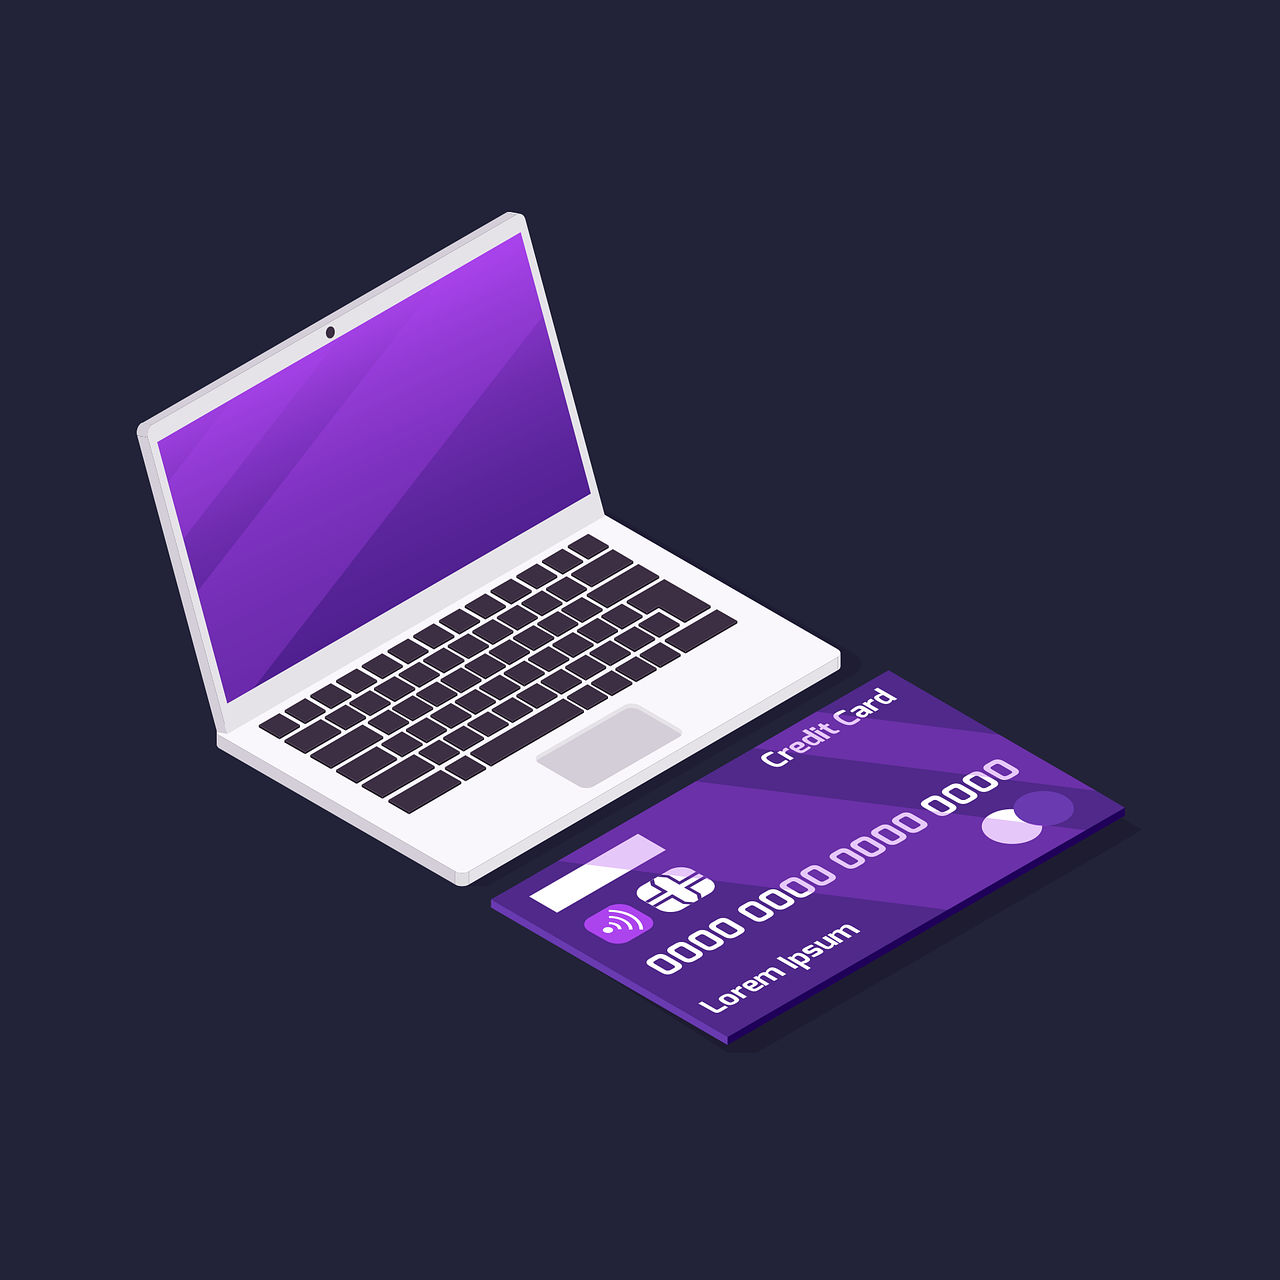 Credit card sitting in front of laptop to symbolize accepting credit card payments on a business website